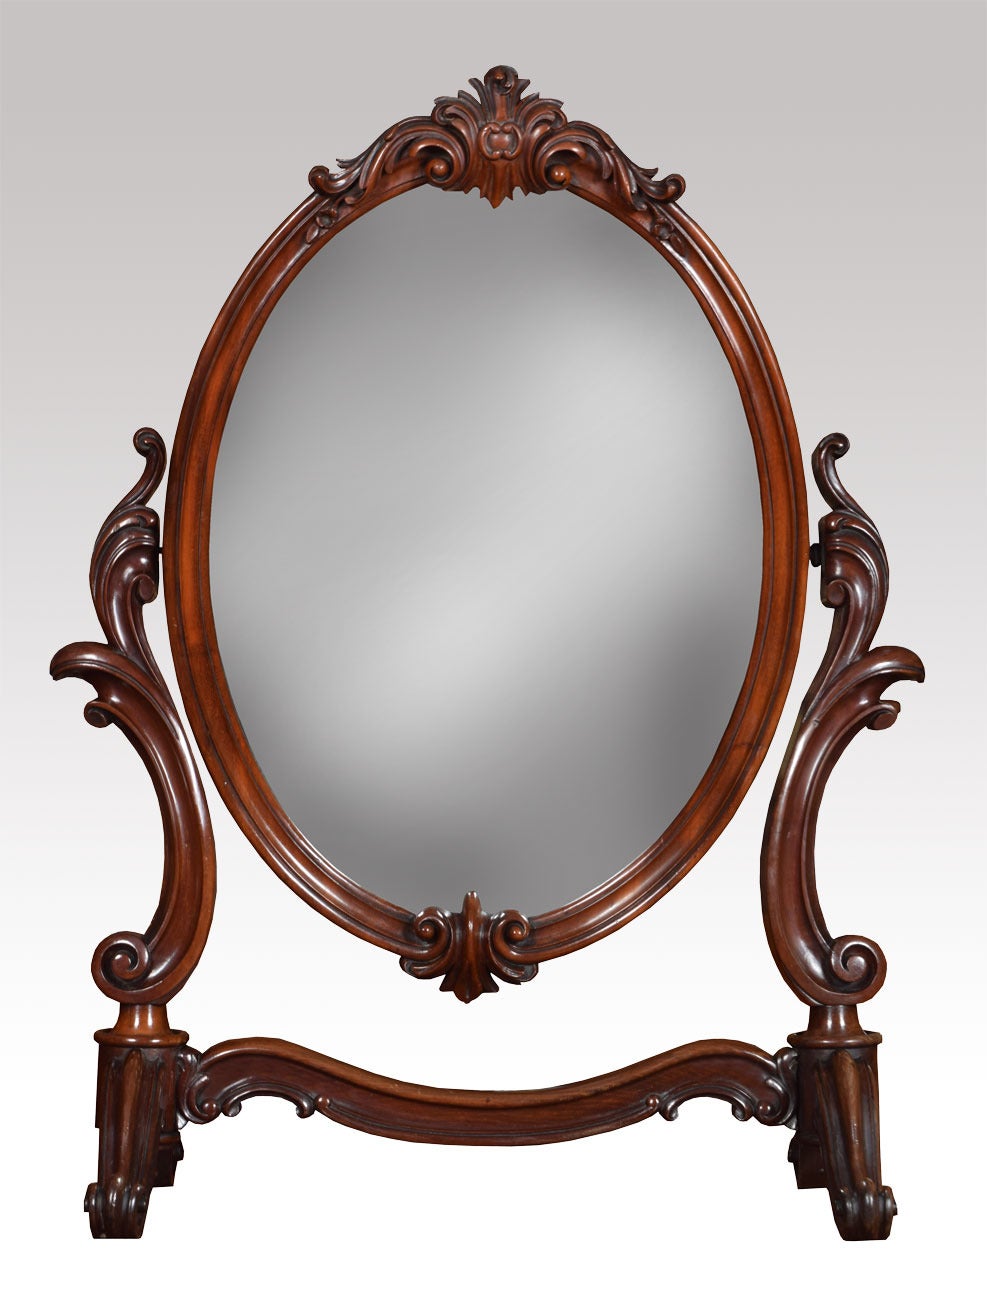 19th century mahogany dressing table mirrors the carved floral pediment to the oval plate mirror surrounded in mahogany frame all raised up on floral scroll supports

Dimensions

Height 34.5 inches

Width 26.5 inches

Depth 12.5 inches.